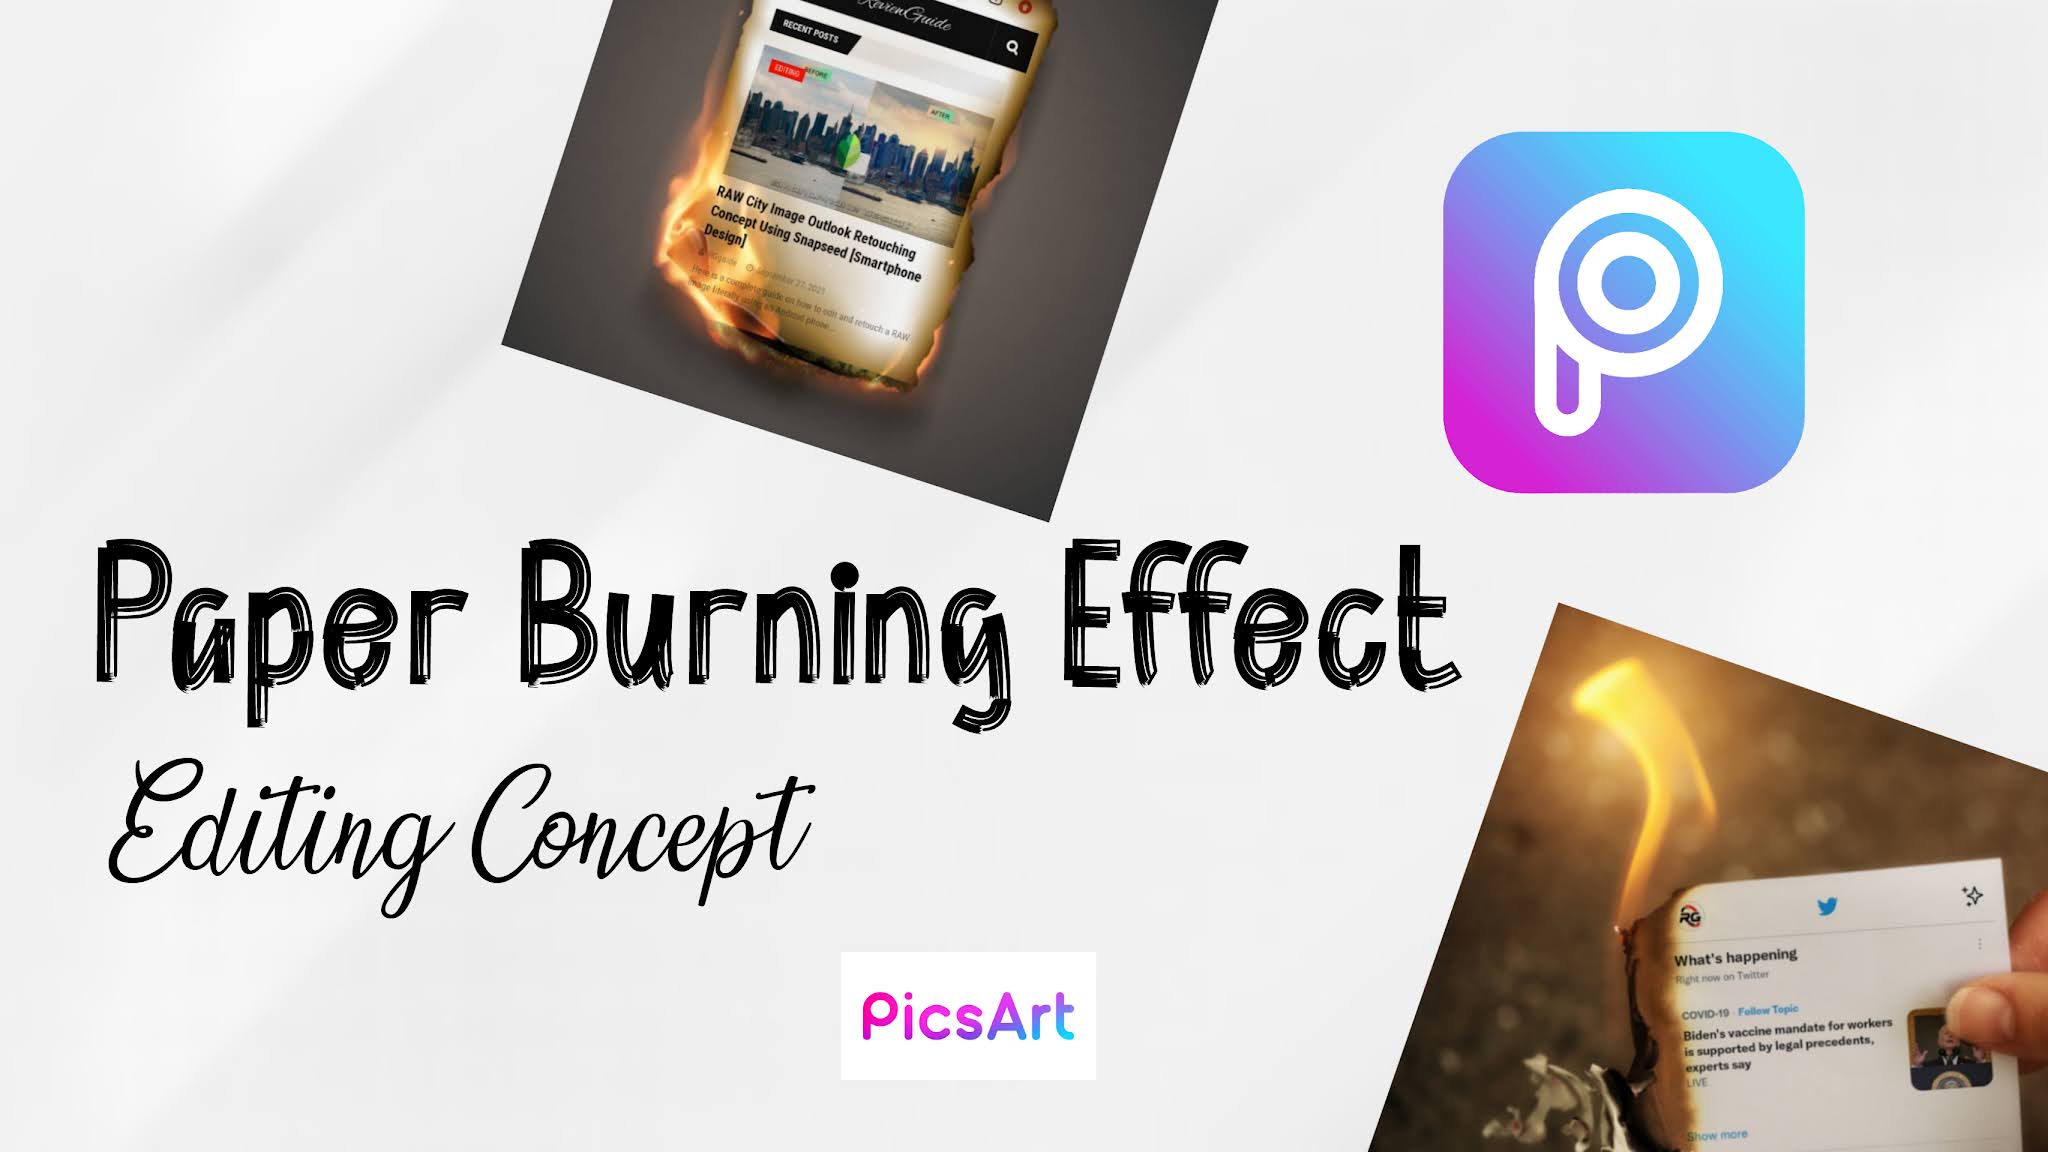 Burning Paper Effect Editing Concept Using Picsart [ Android & iOS ]